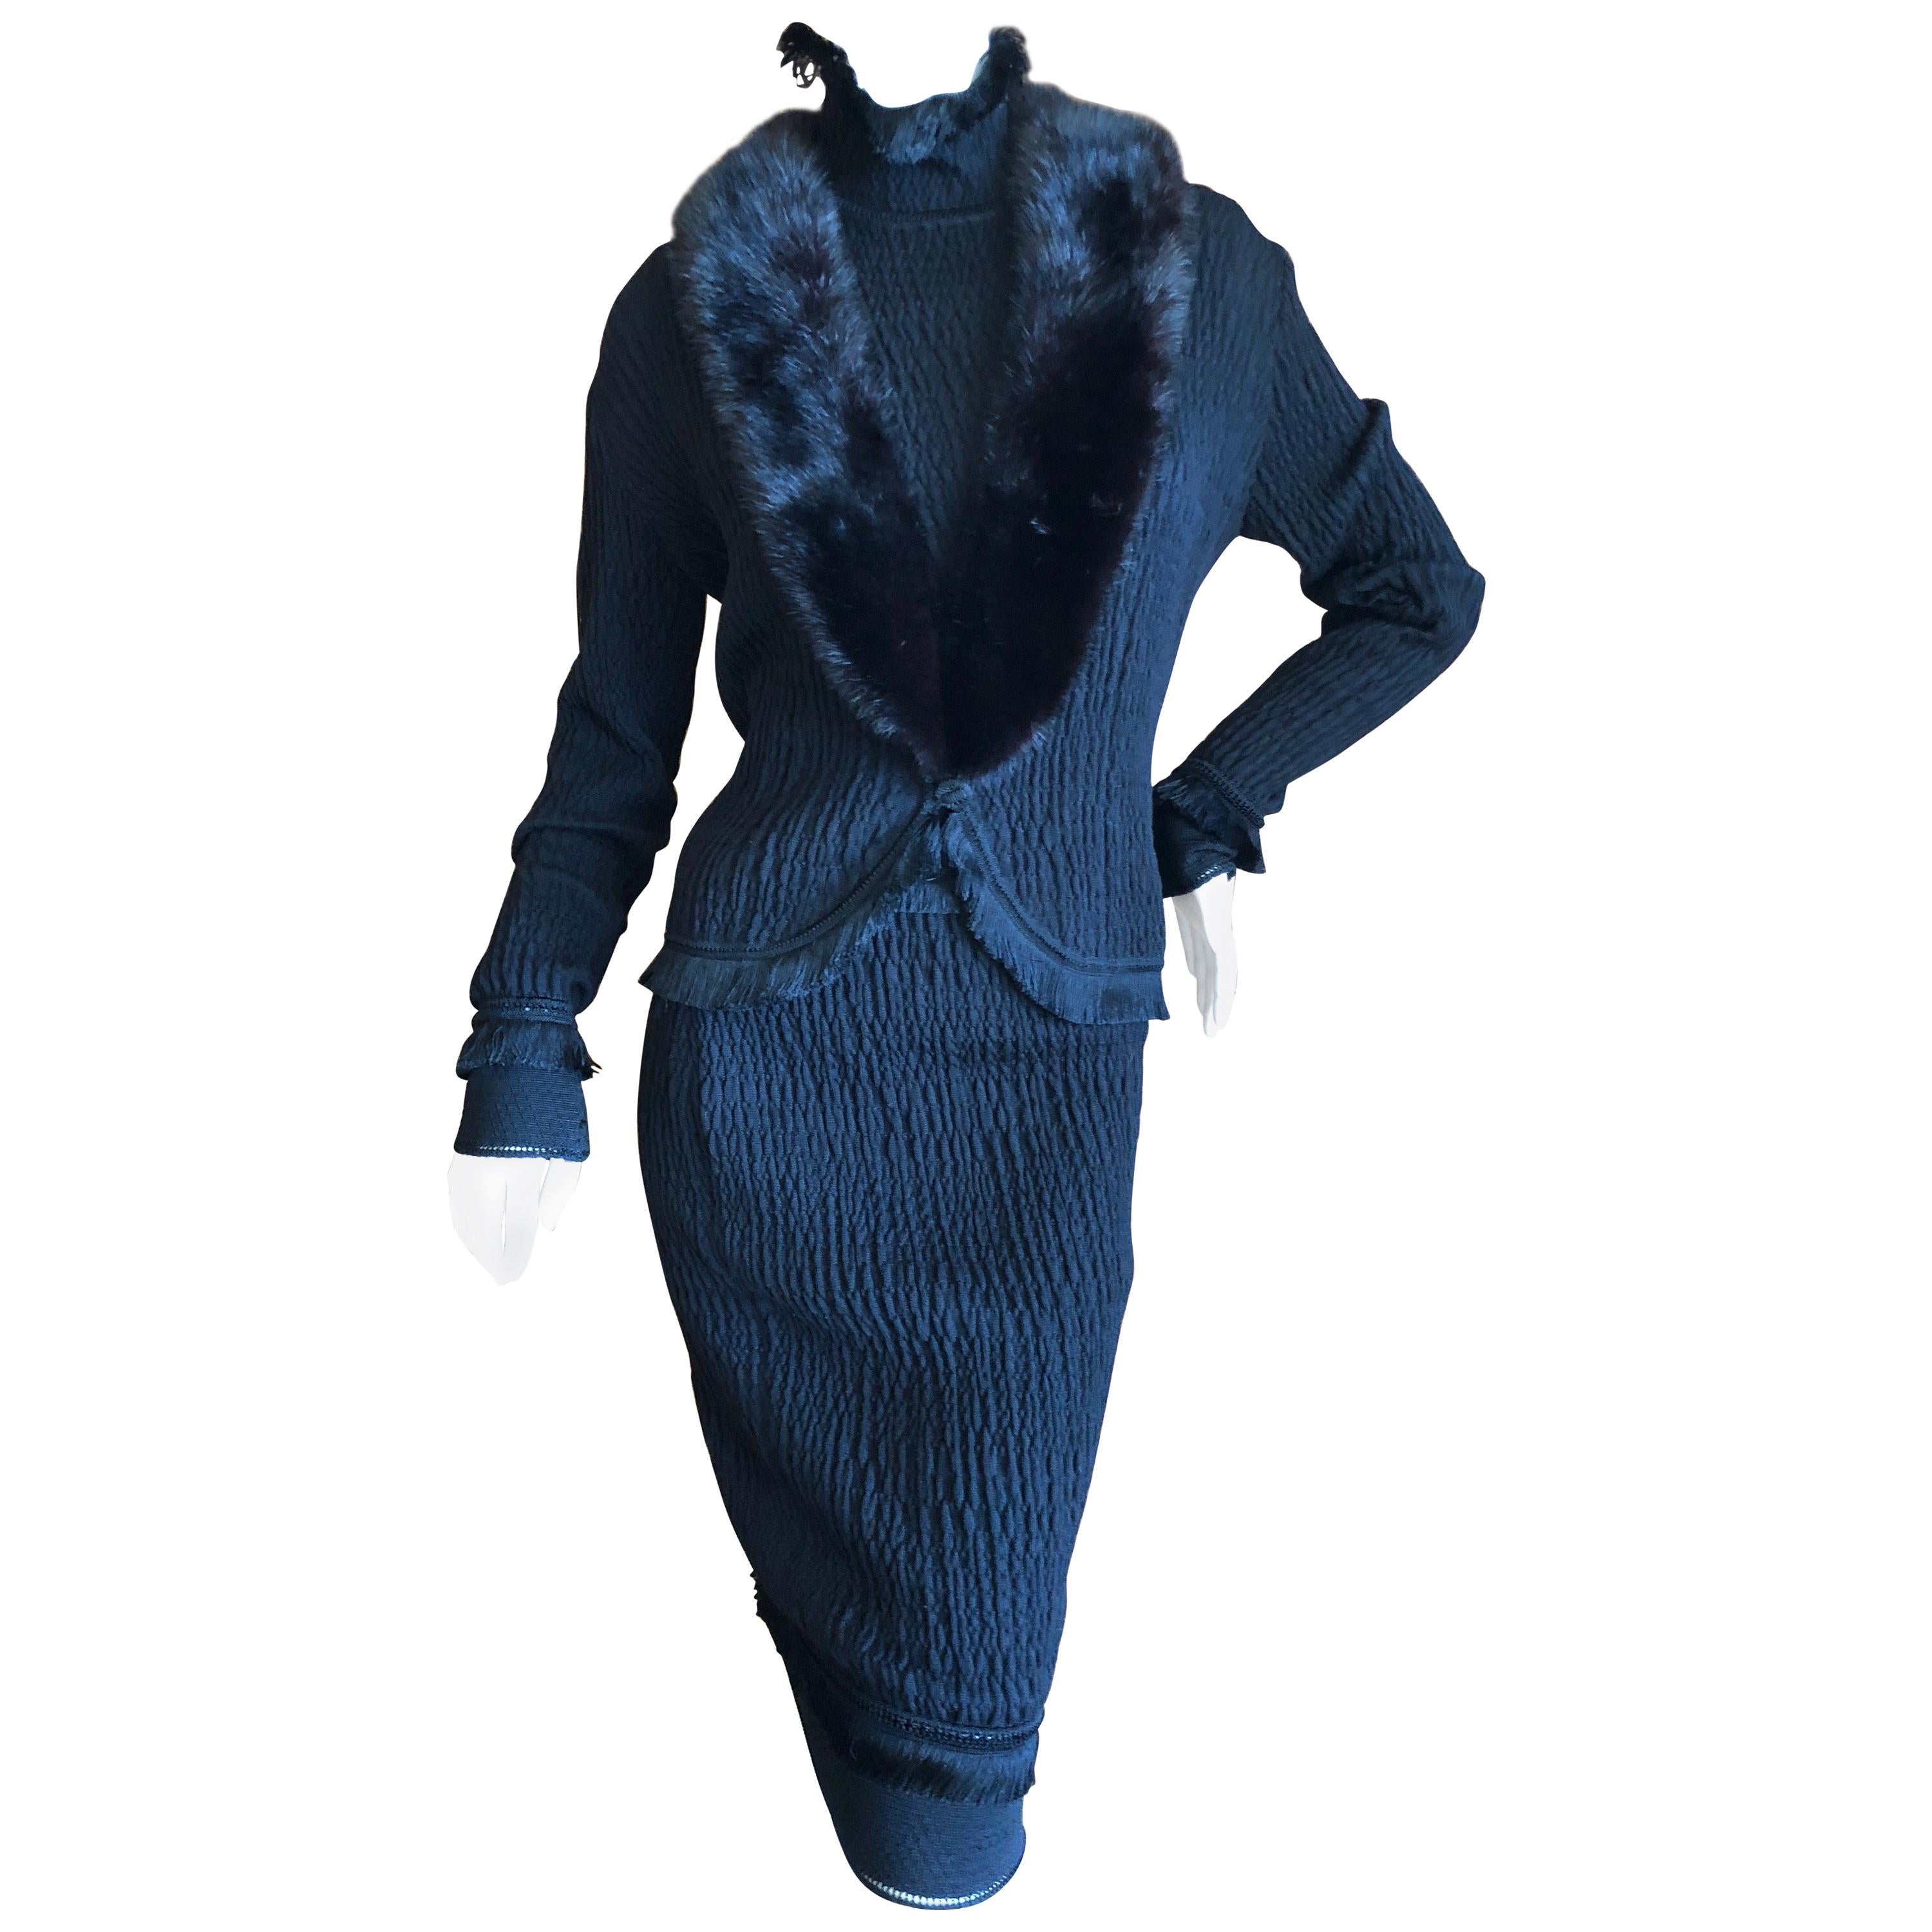 John Galliano Black Fringed Dress with Matching Wide Mink Collar Sweater, 1990s  For Sale